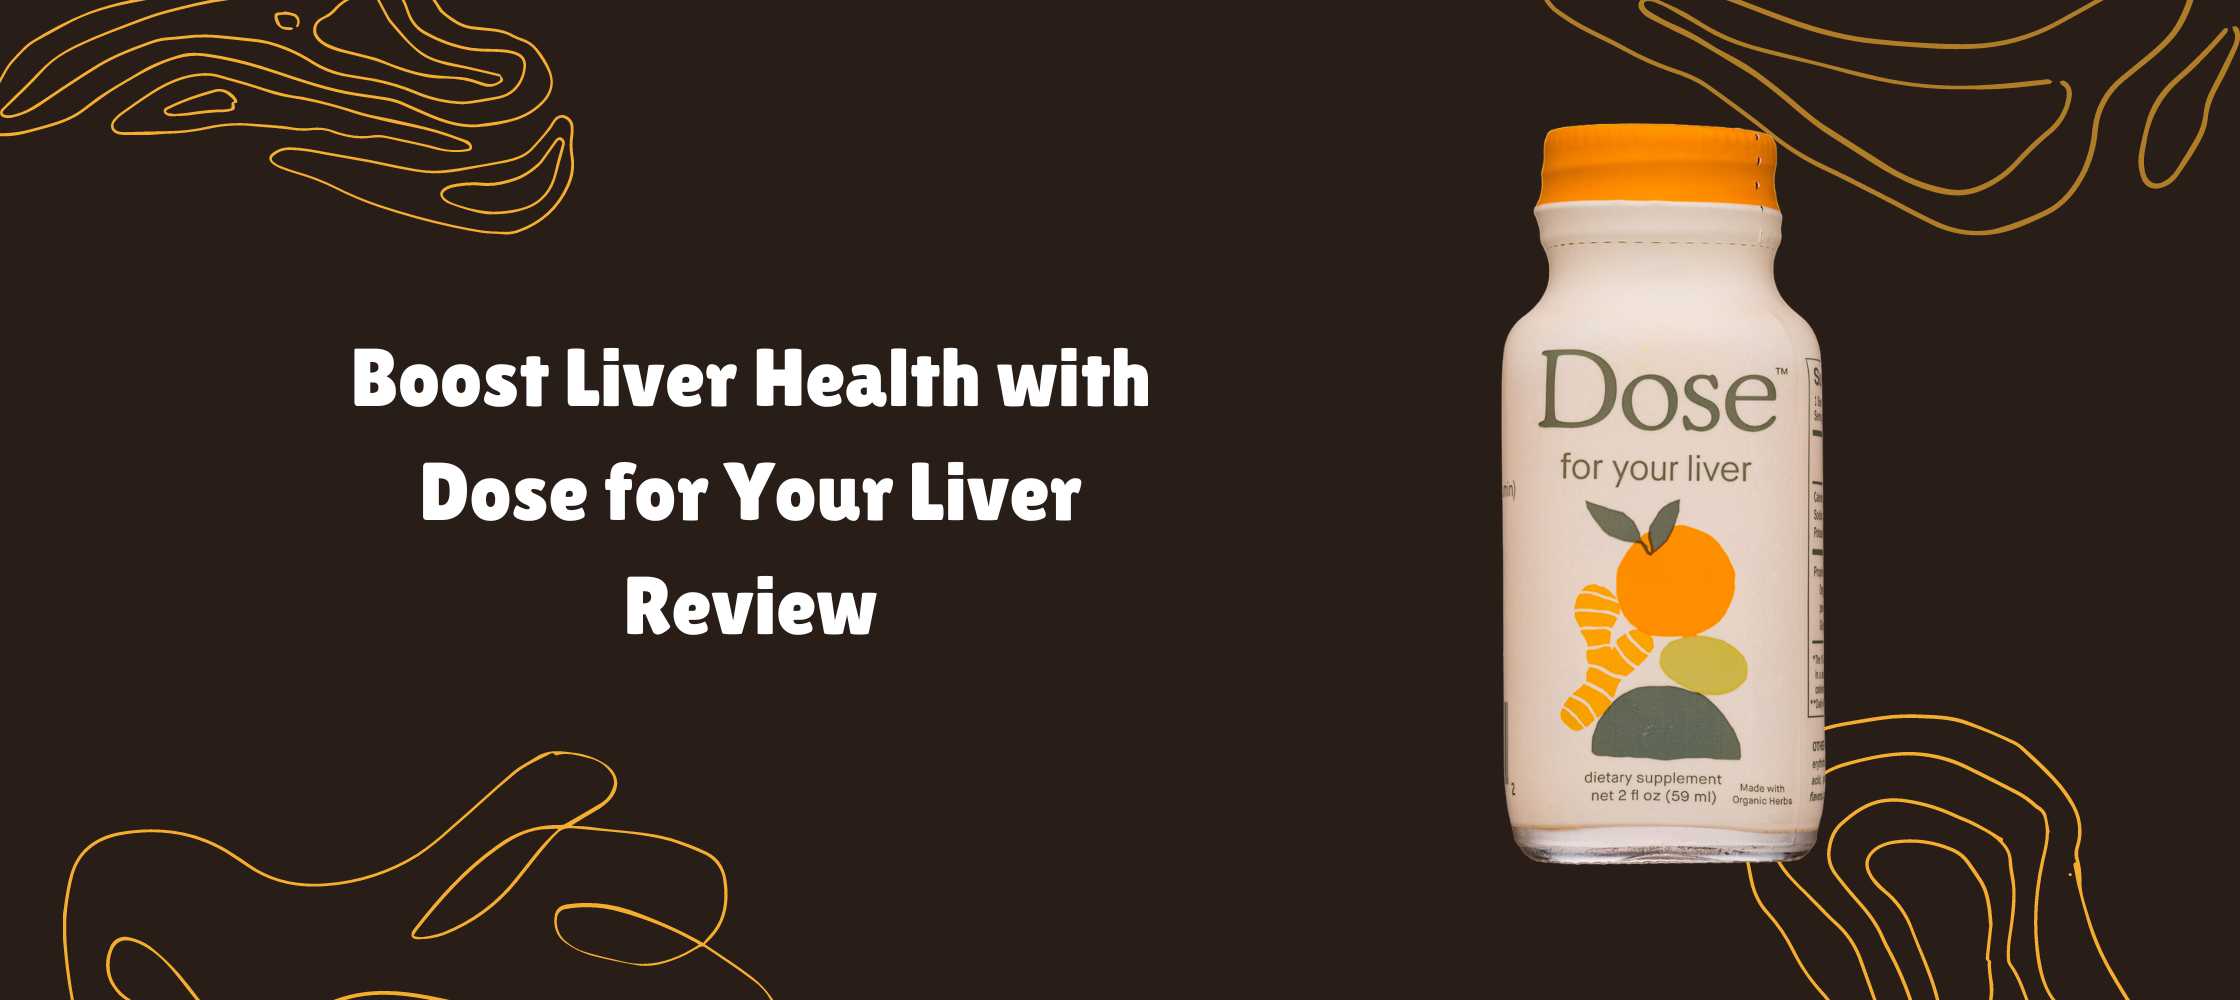 Dose for Your Liver Review